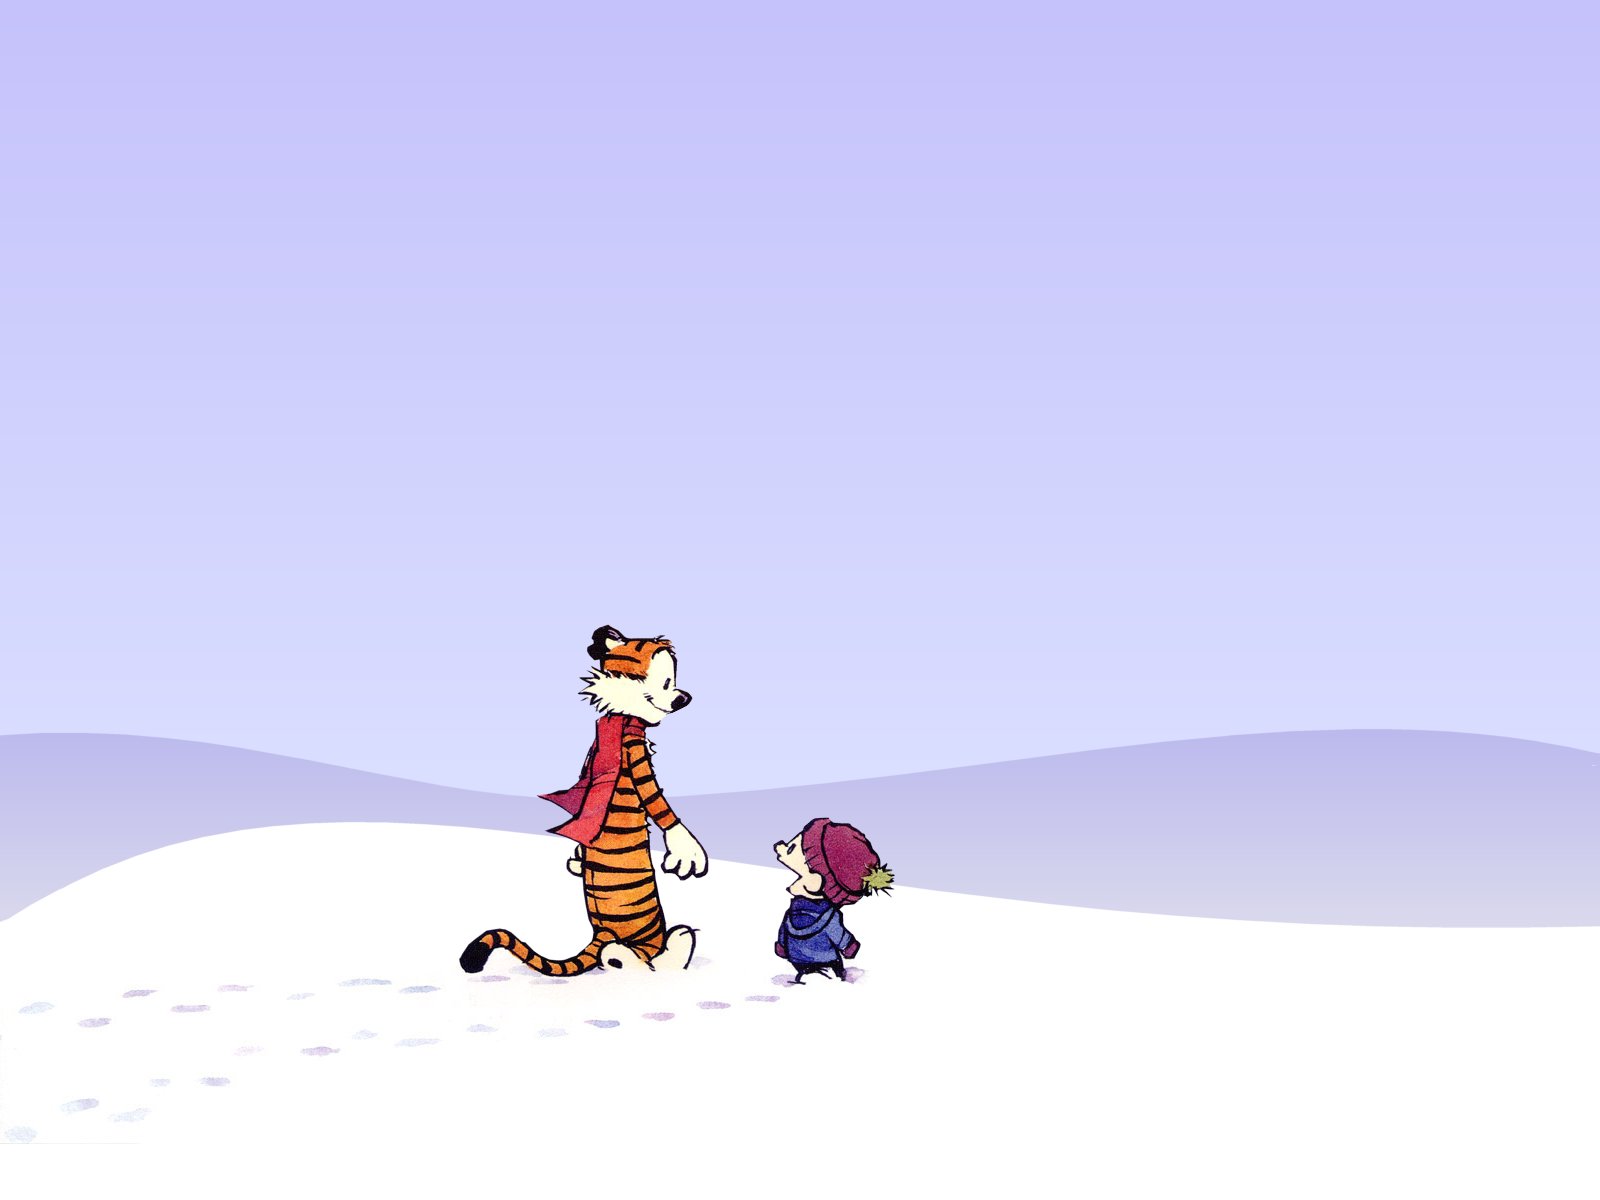 comics, calvin & hobbes, calvin (calvin & hobbes), hobbes (calvin & hobbes) images